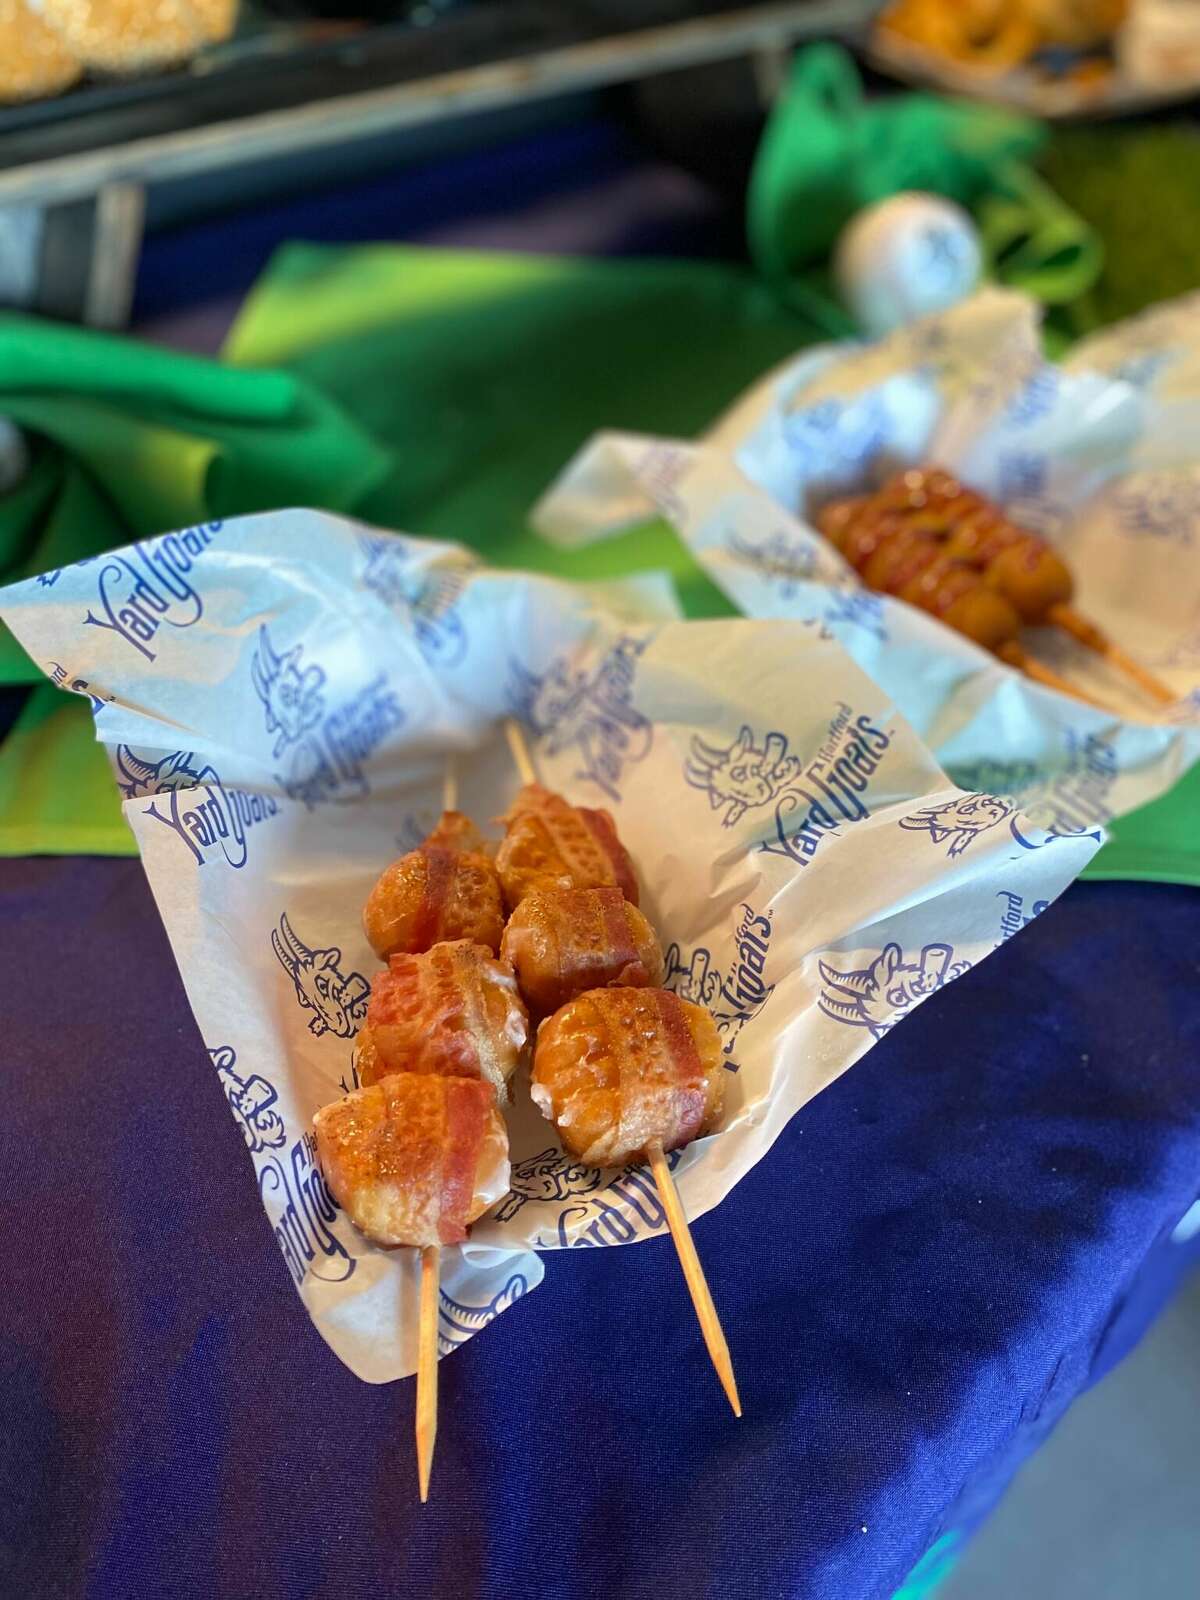 Bacon-wrapped Munchkins are among the returning snacks at Dunkin' Park this season.